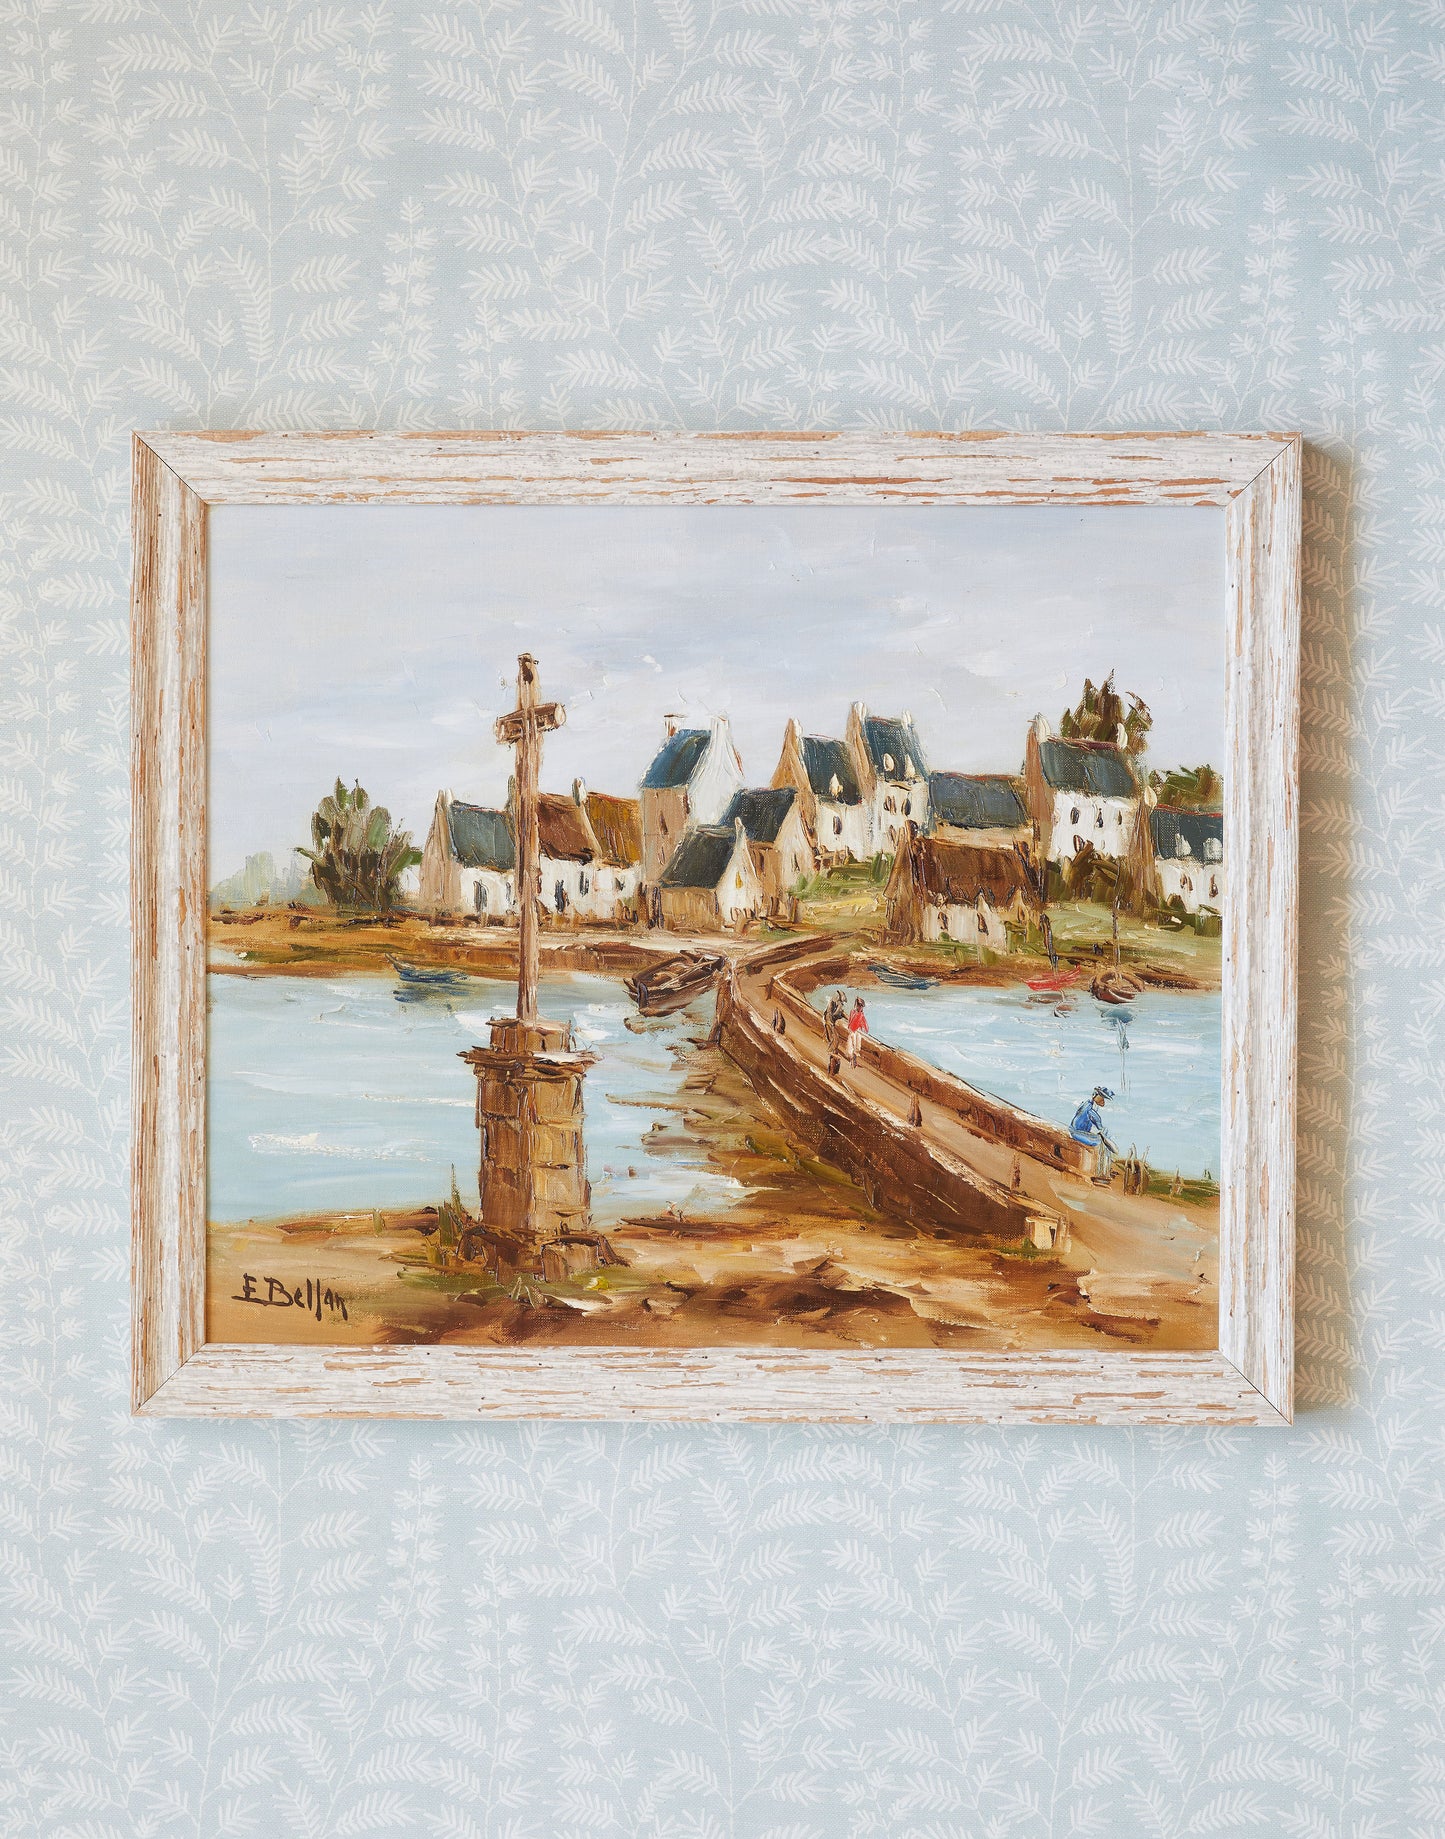 A 20th Century French Oil on Canvas Townscape by the Sea